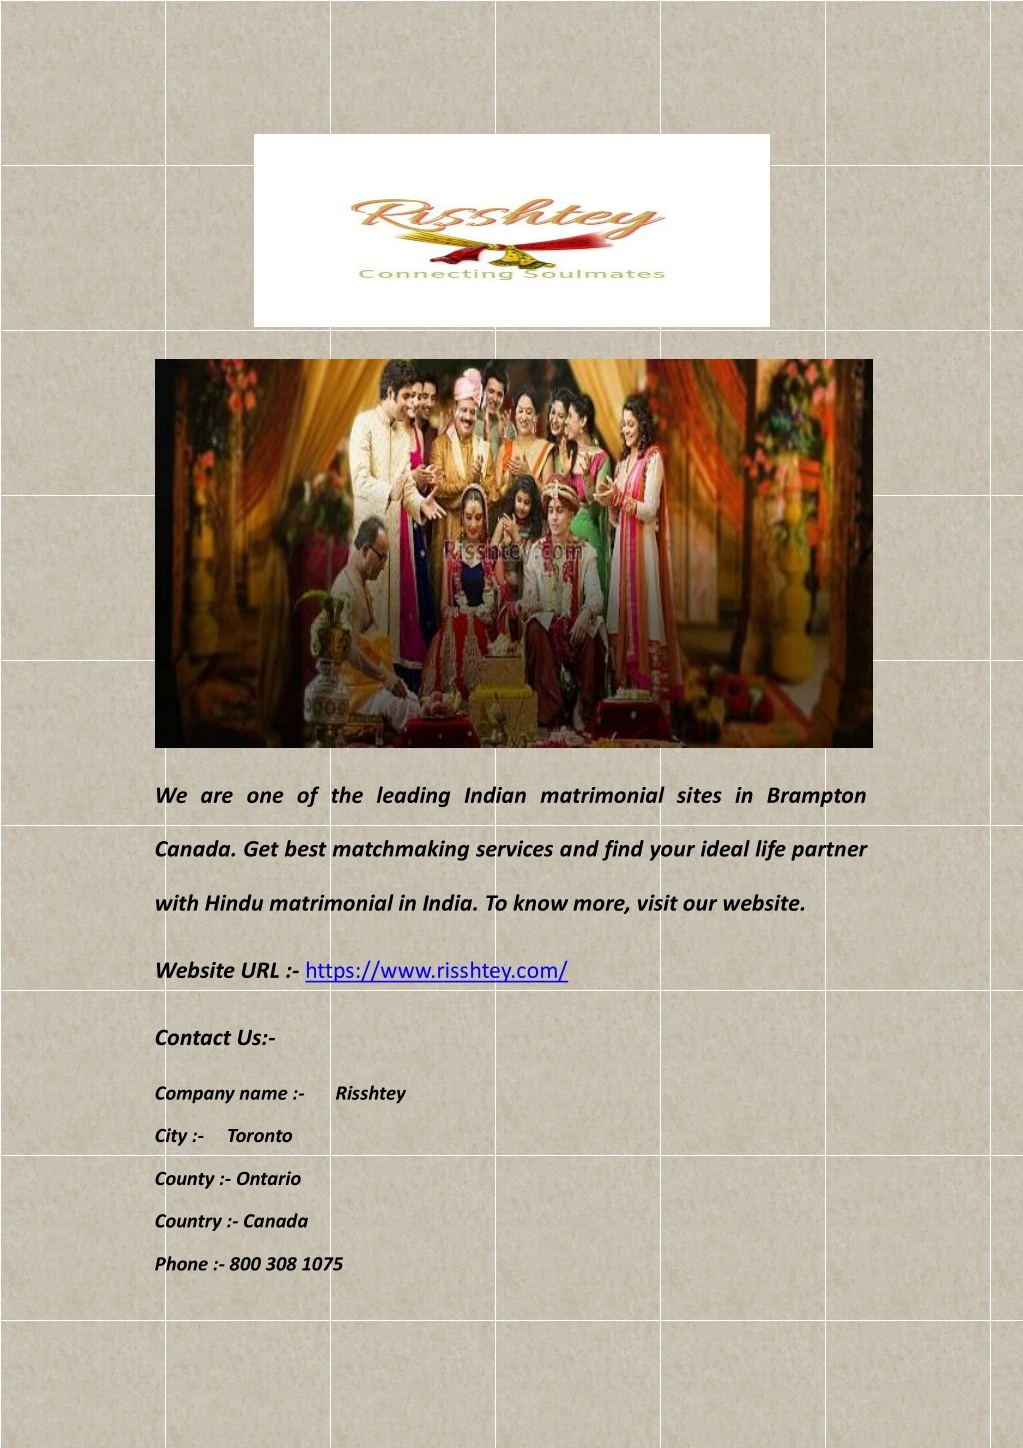 we are one of the leading indian matrimonial